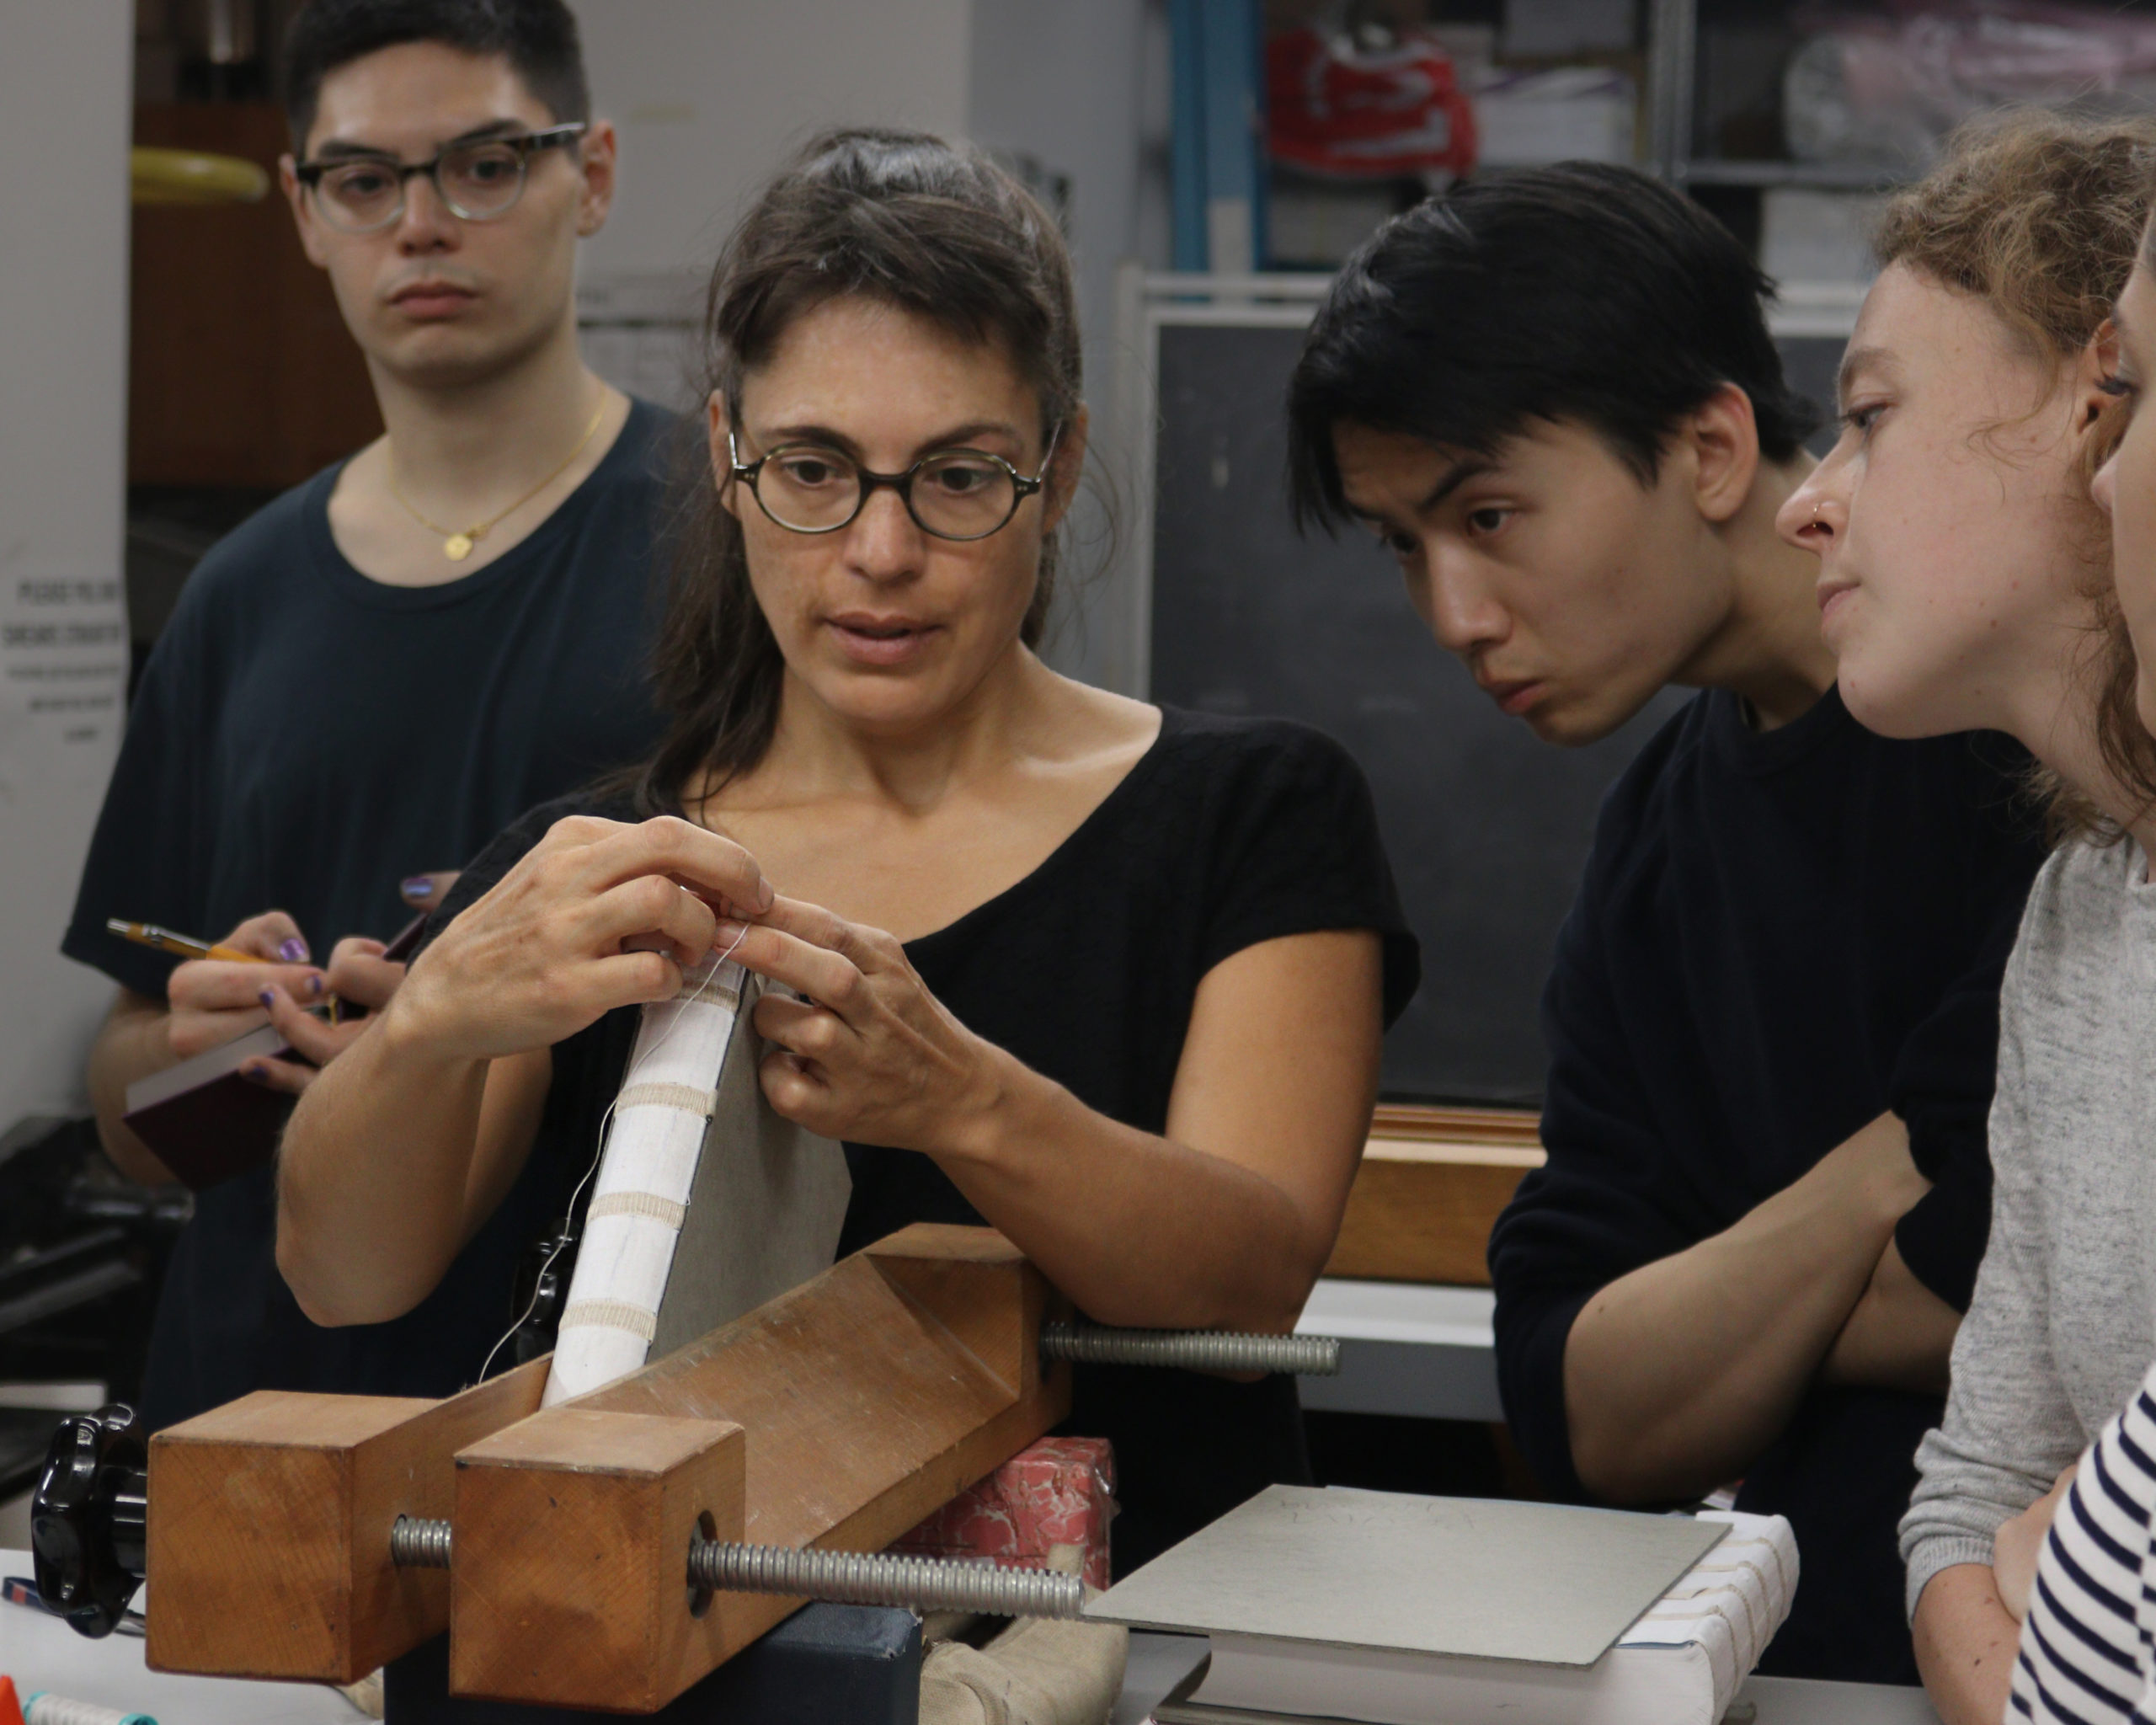 Celine Lombardi demonstrates how to sew headbands to a group of students